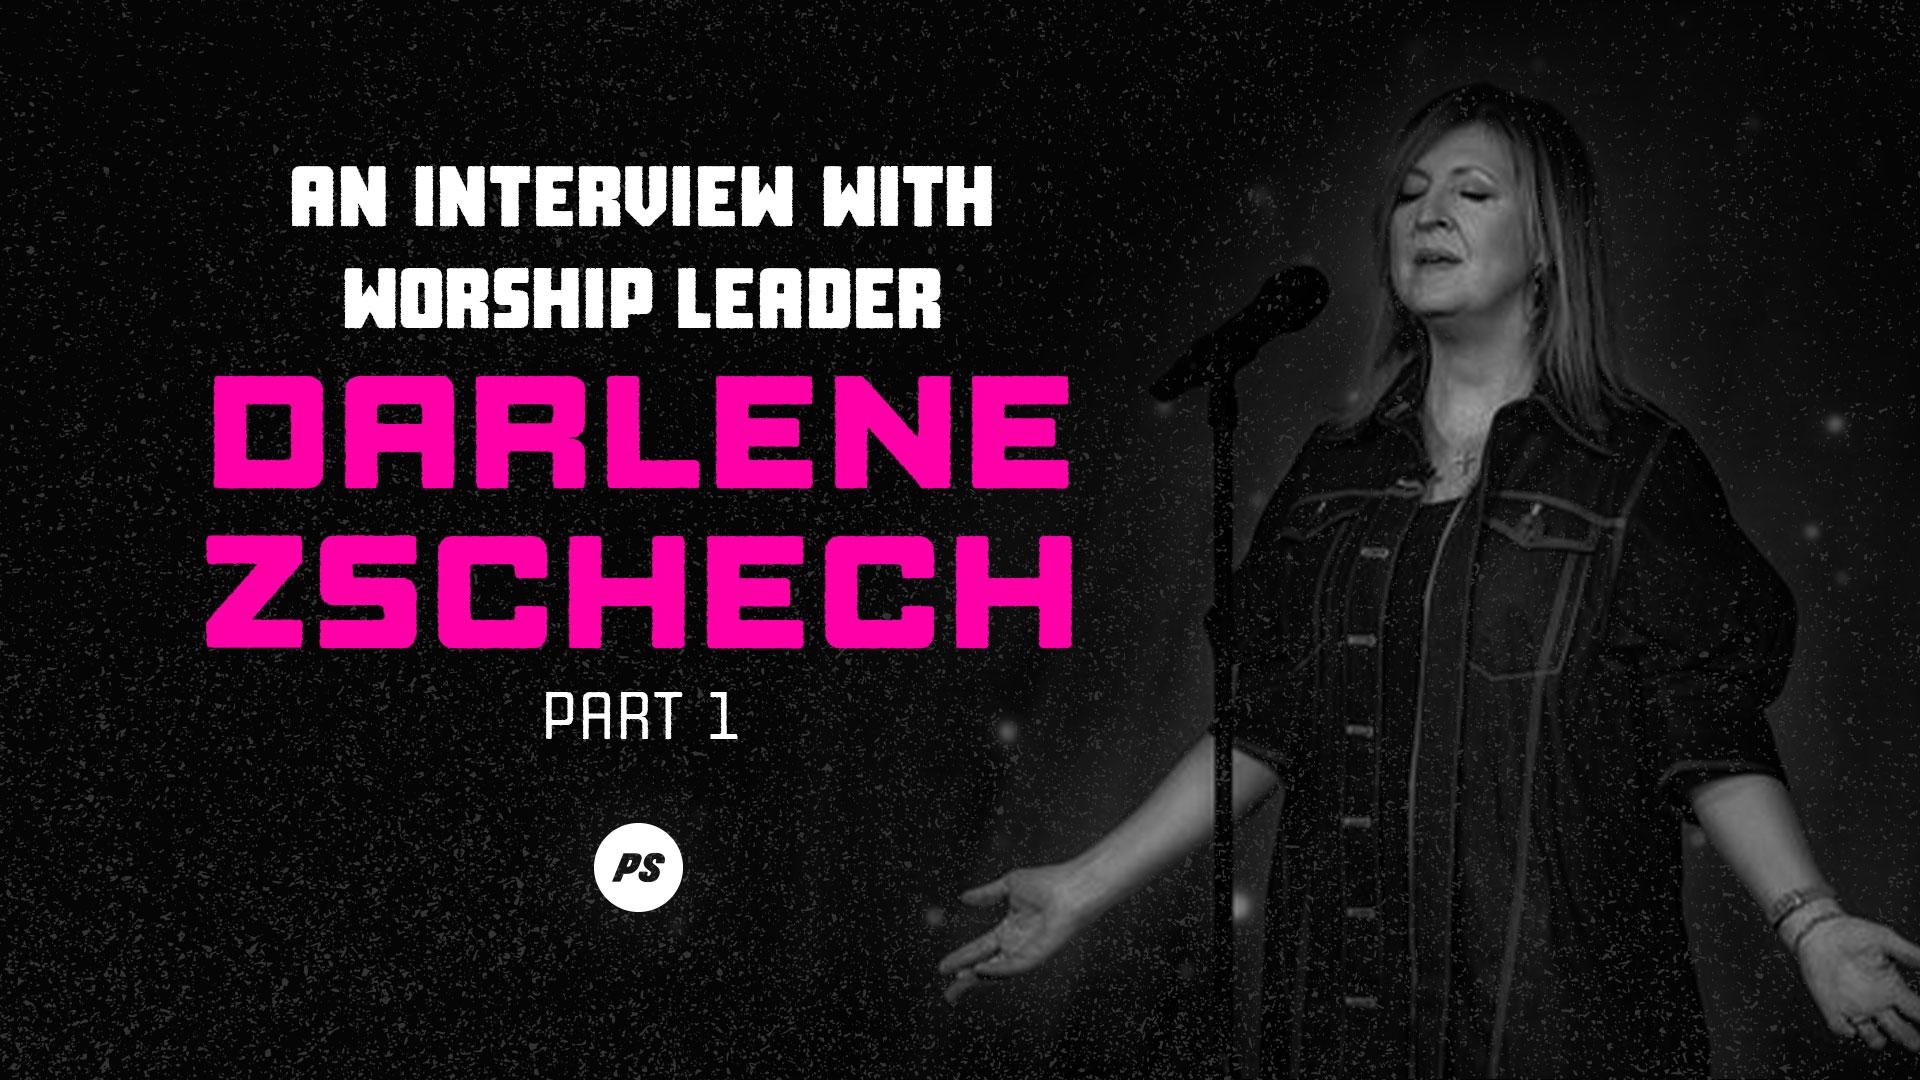 Featured image for “An Interview with Darlene Zschech (Part 1)”